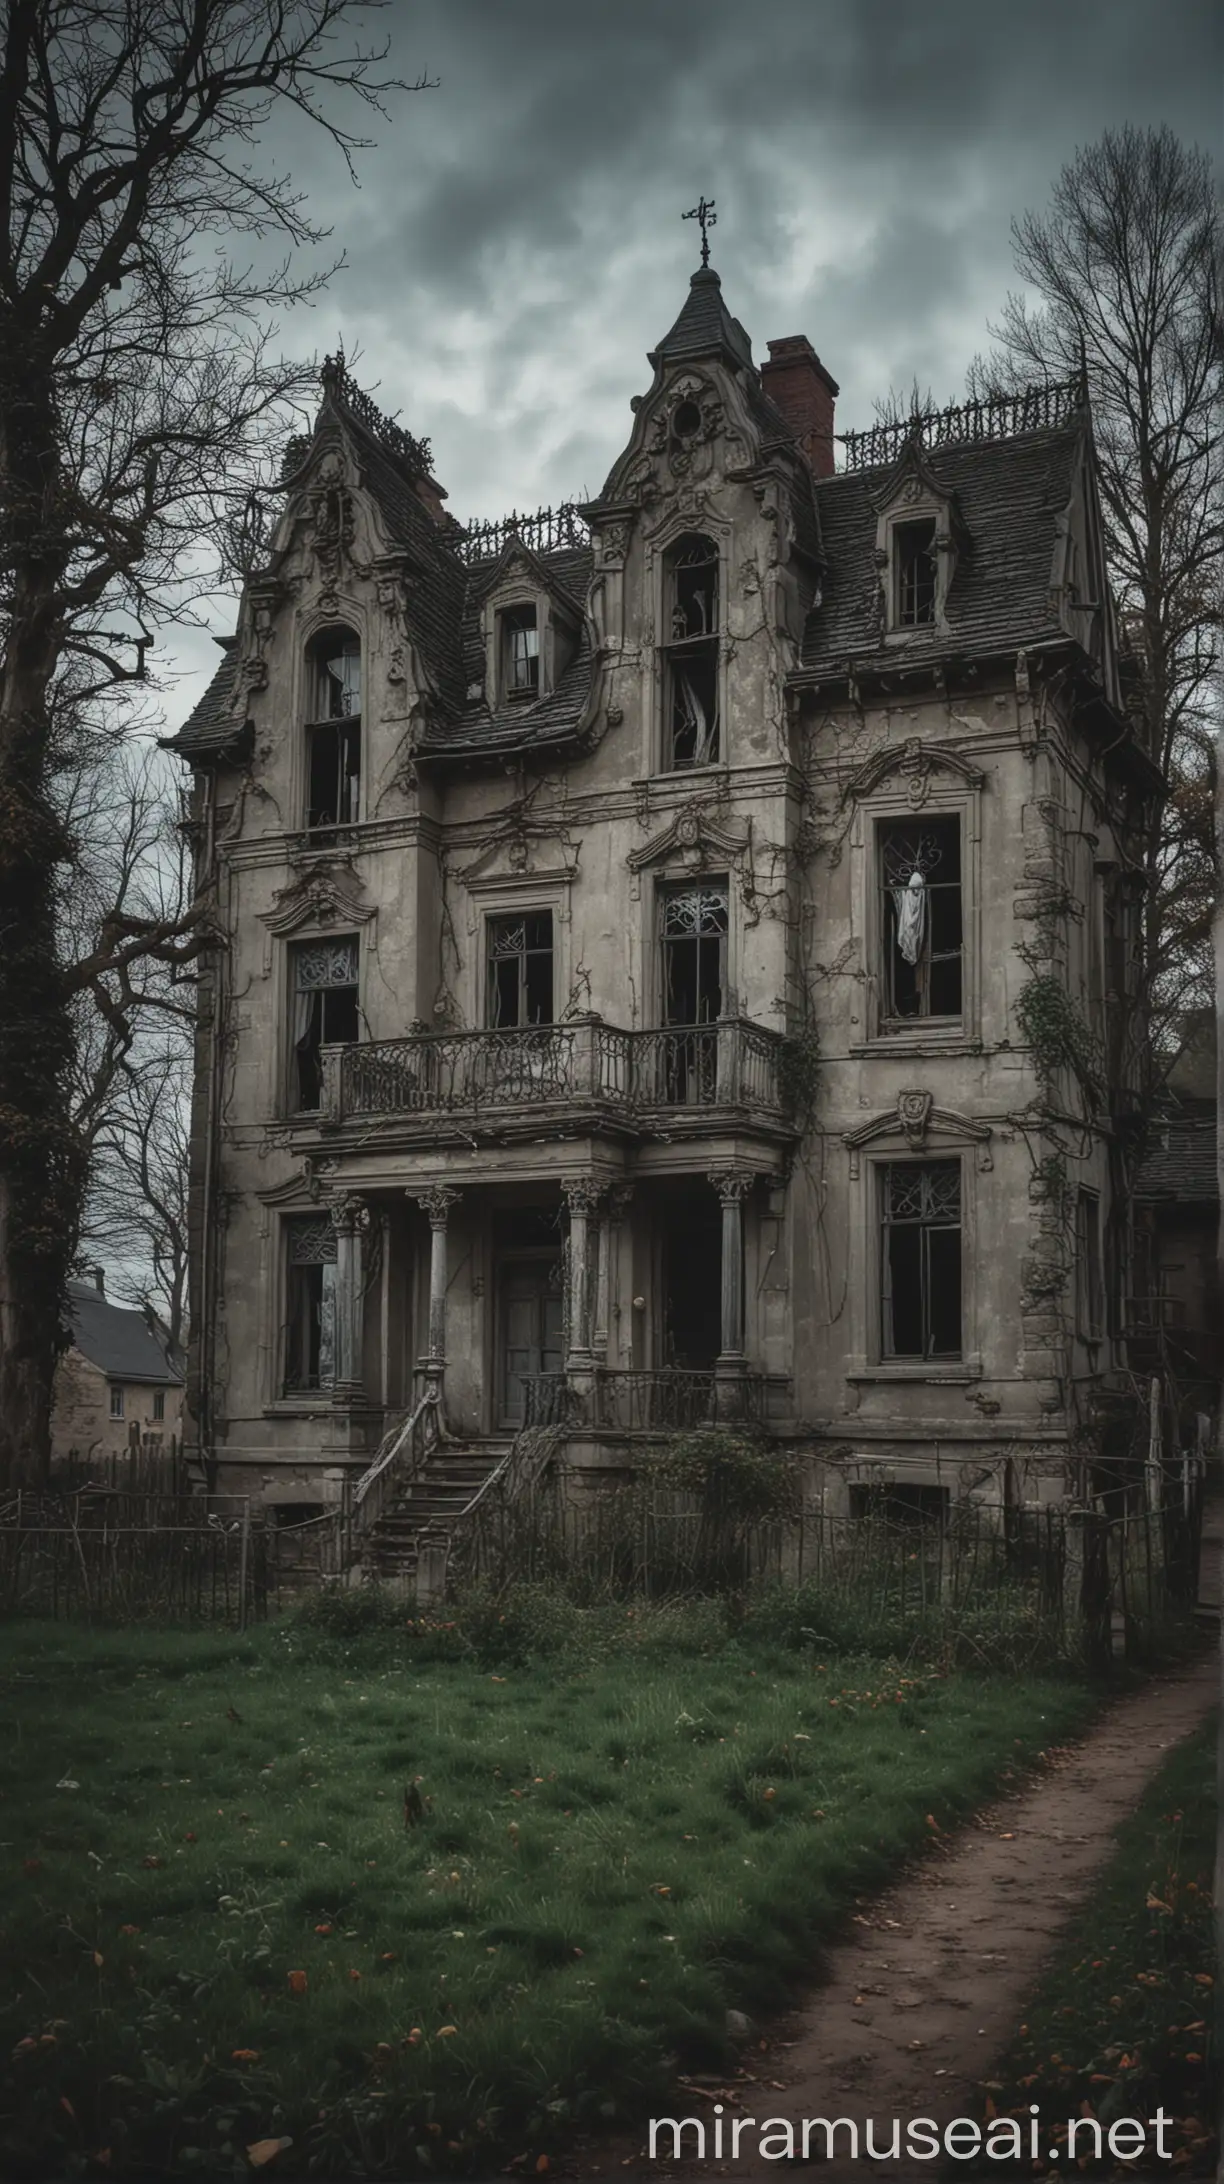 Mysterious Ghostly Mansion in a Small Village